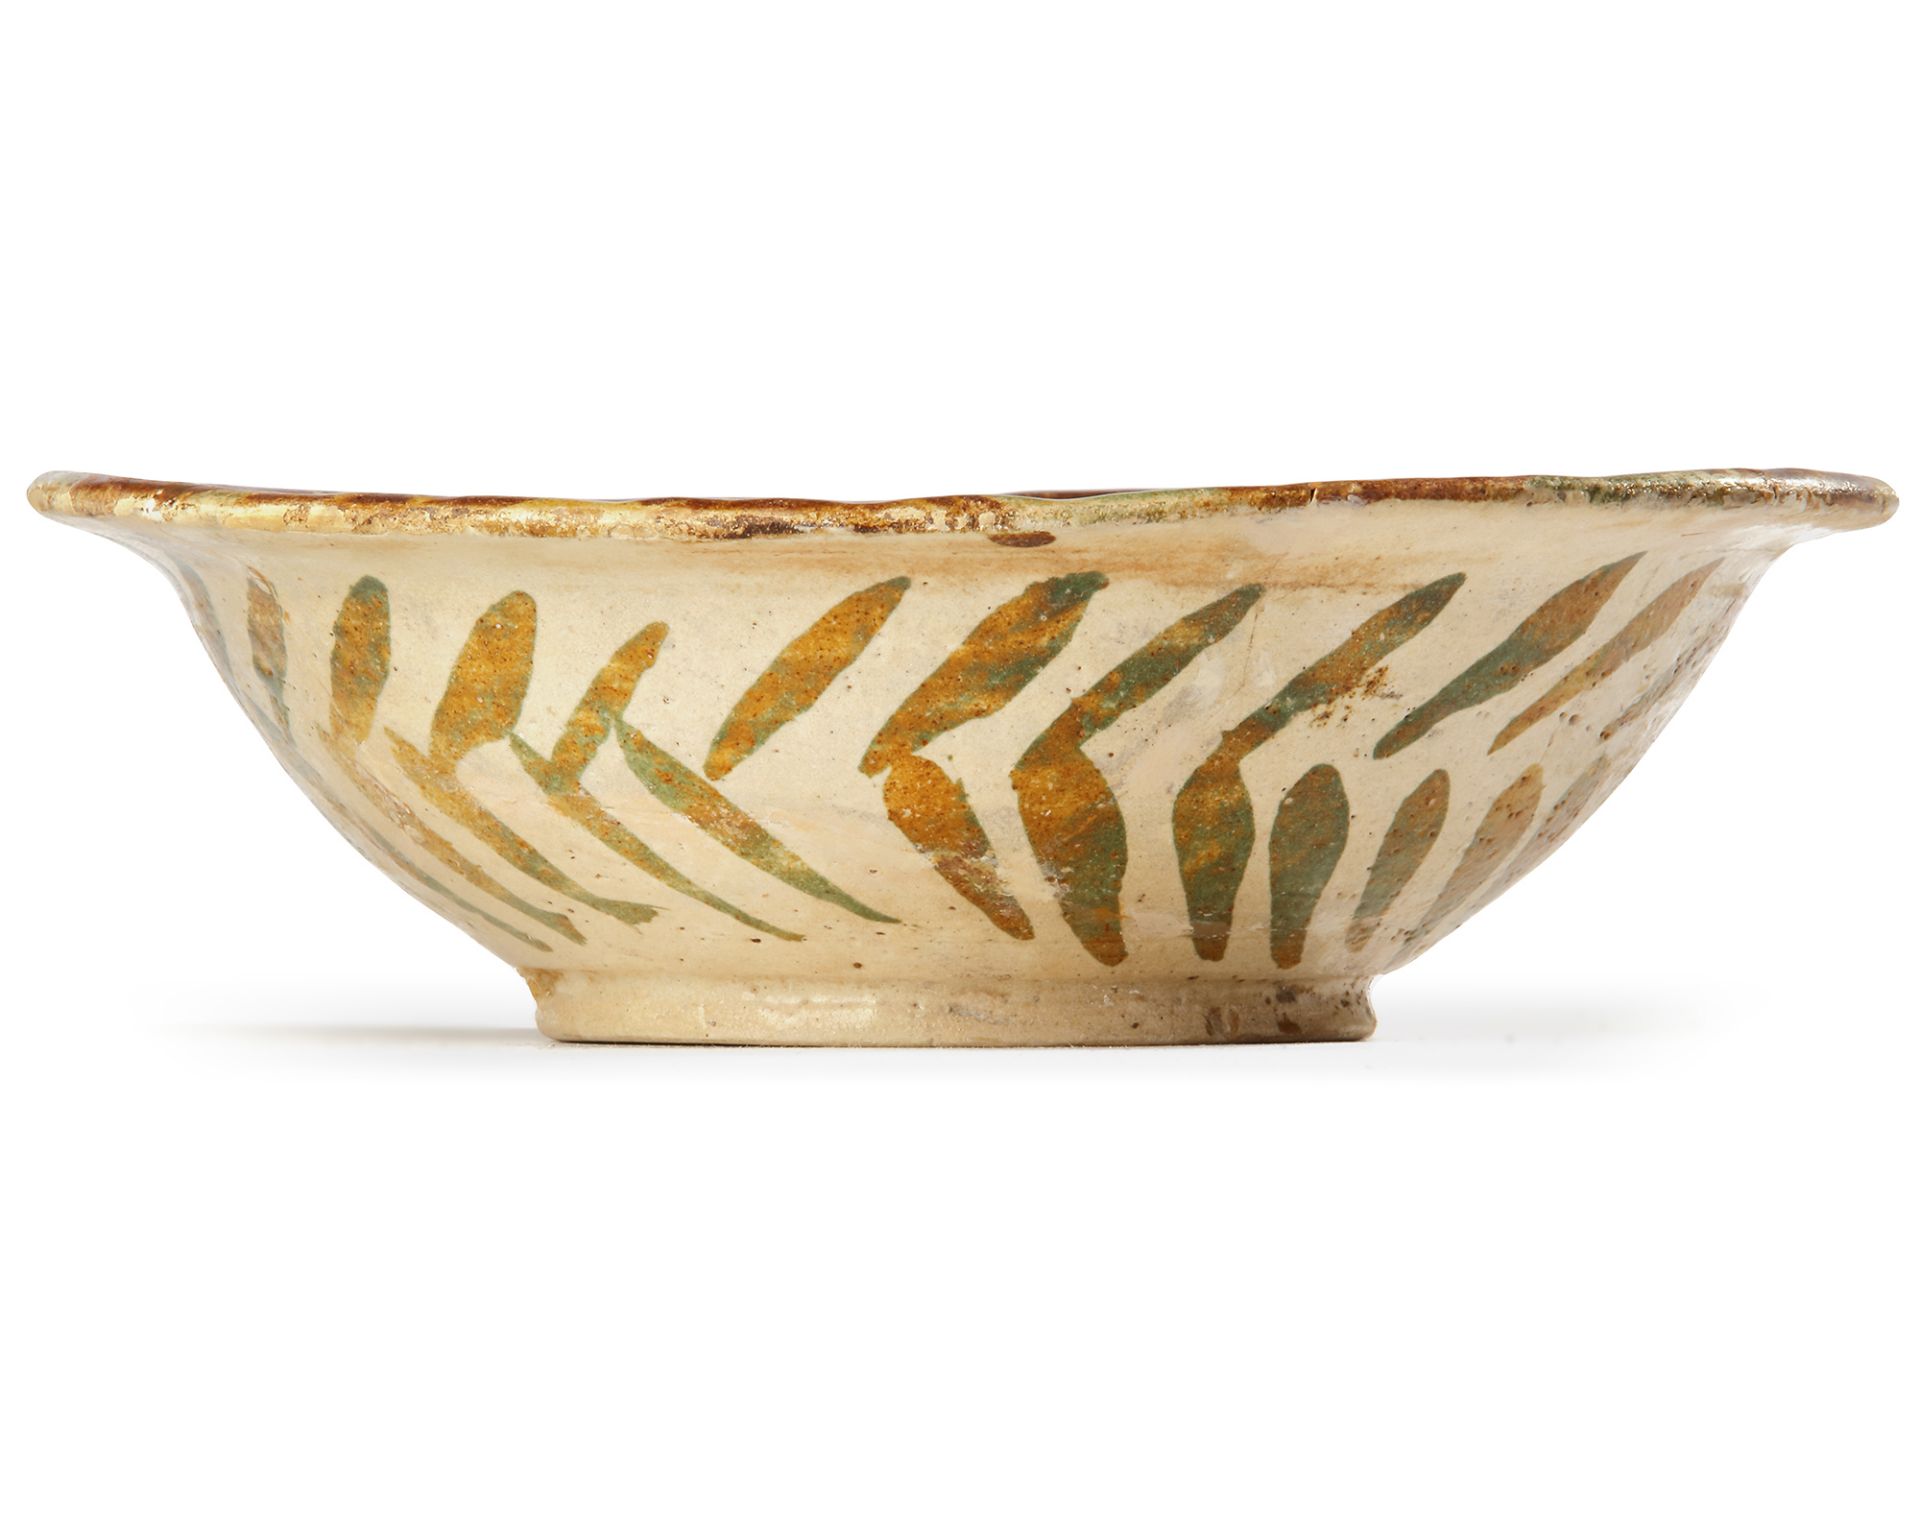 A FIGURAL ABBASID LUSTRE BOWL, MESOPOTAMIA OR CENTRAL ASIA, 9TH CENTURY - Image 3 of 8